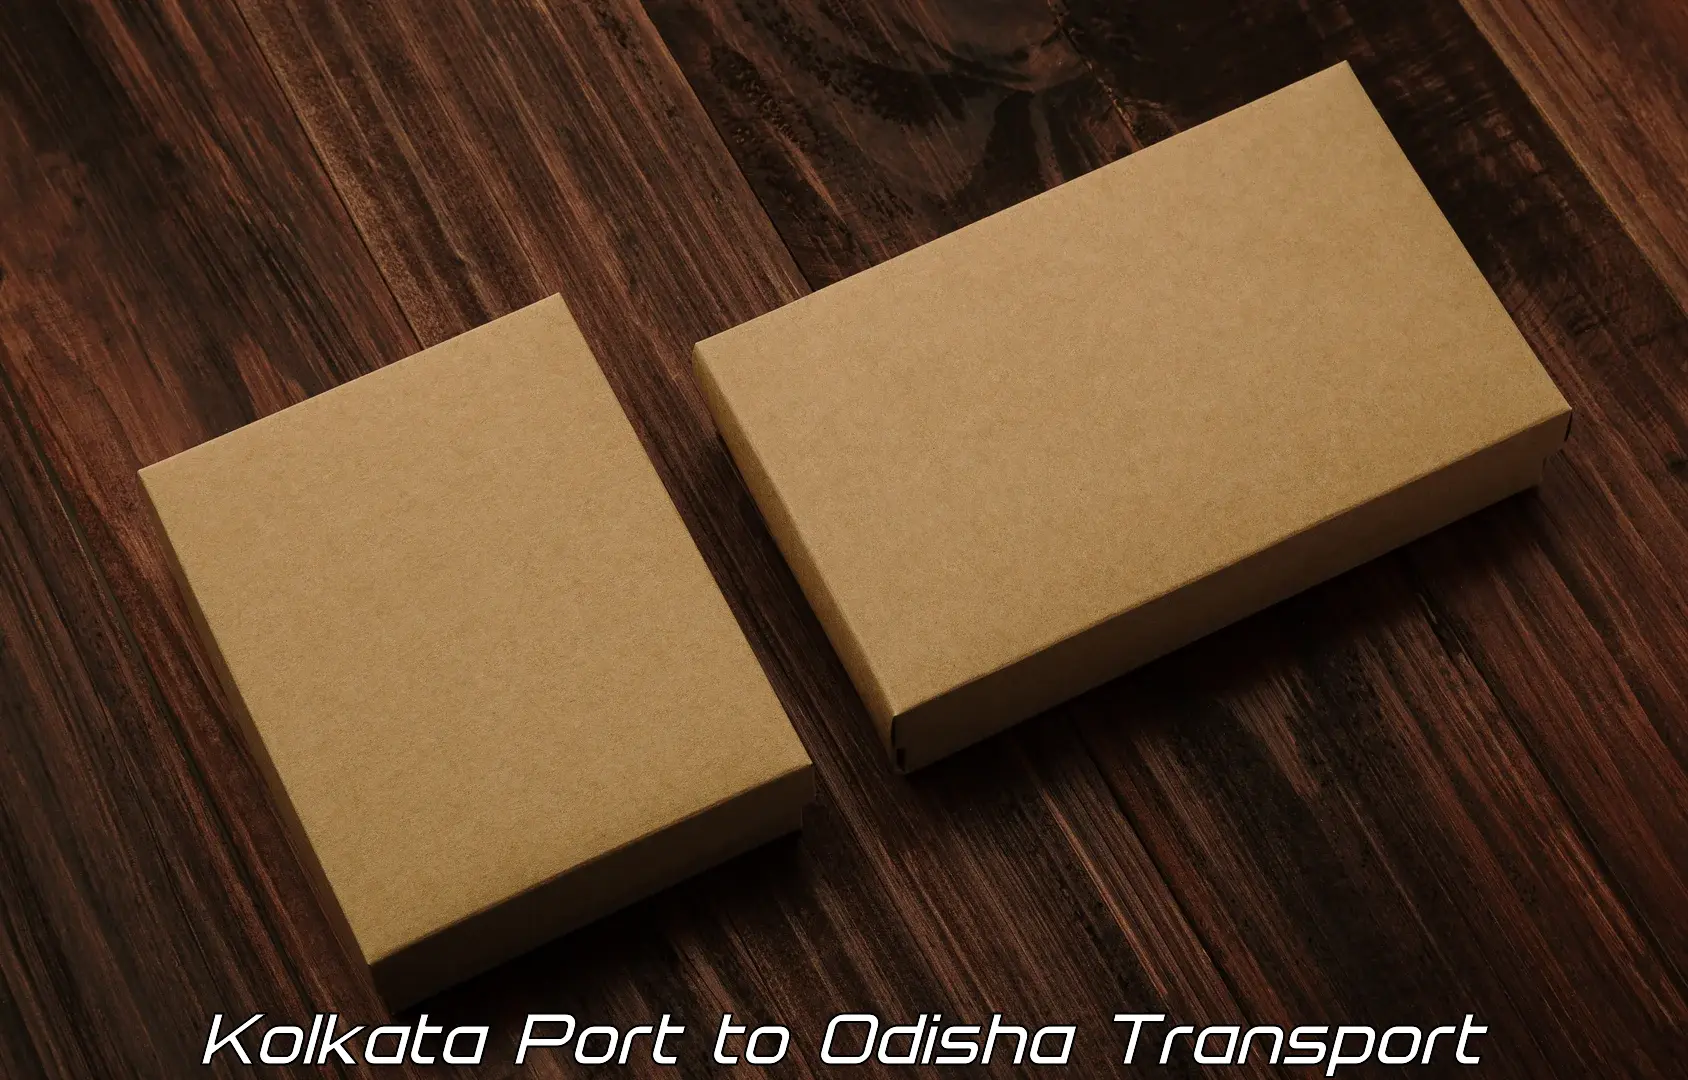 Package delivery services Kolkata Port to Raruan